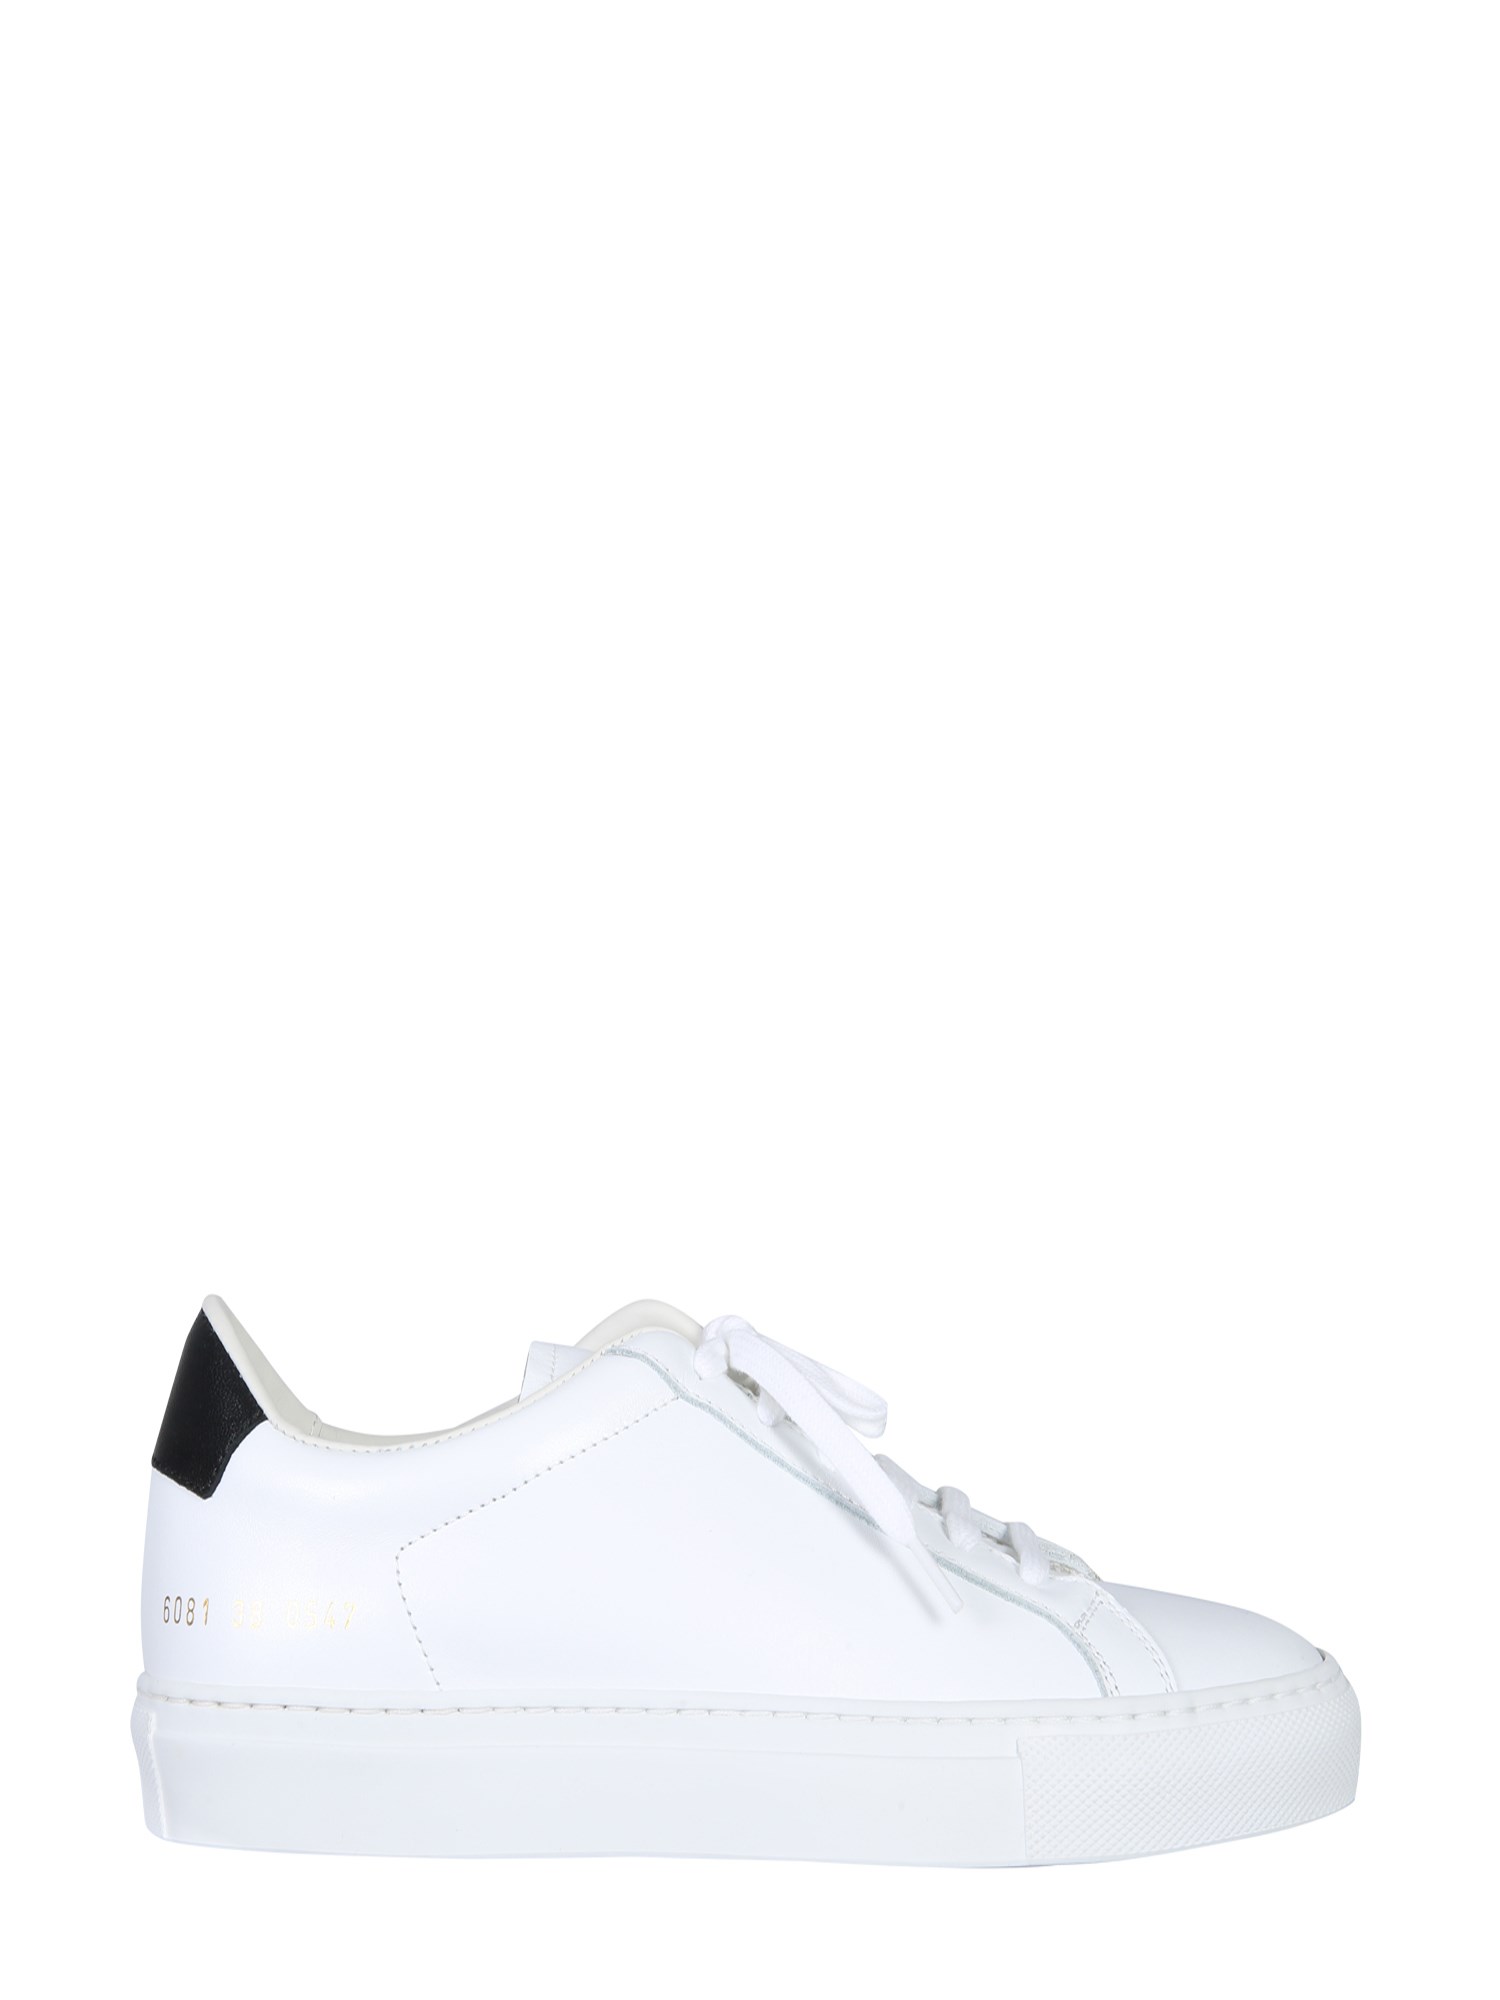 common projects retro low sneakers